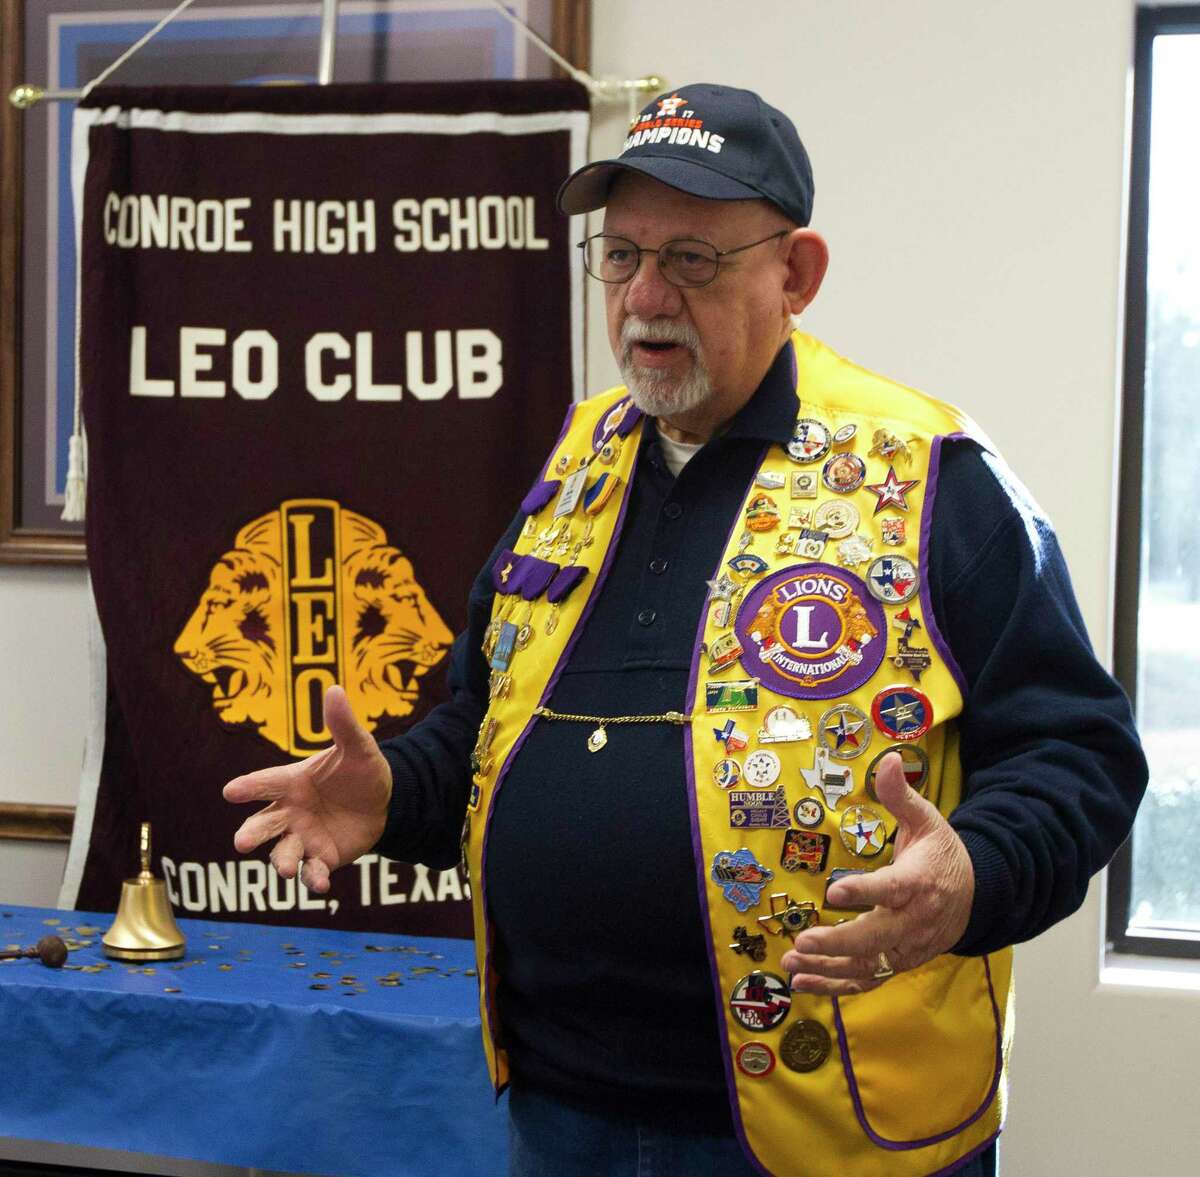 Eddie Risha, member of the Conroe Noon Lions Club, speaks during a meeting of the Conroe High School LEO Club, Wednesday, Jan. 24, 2018, in Conroe. The Conroe Noon Lions members mourned Risha’s passing this week.